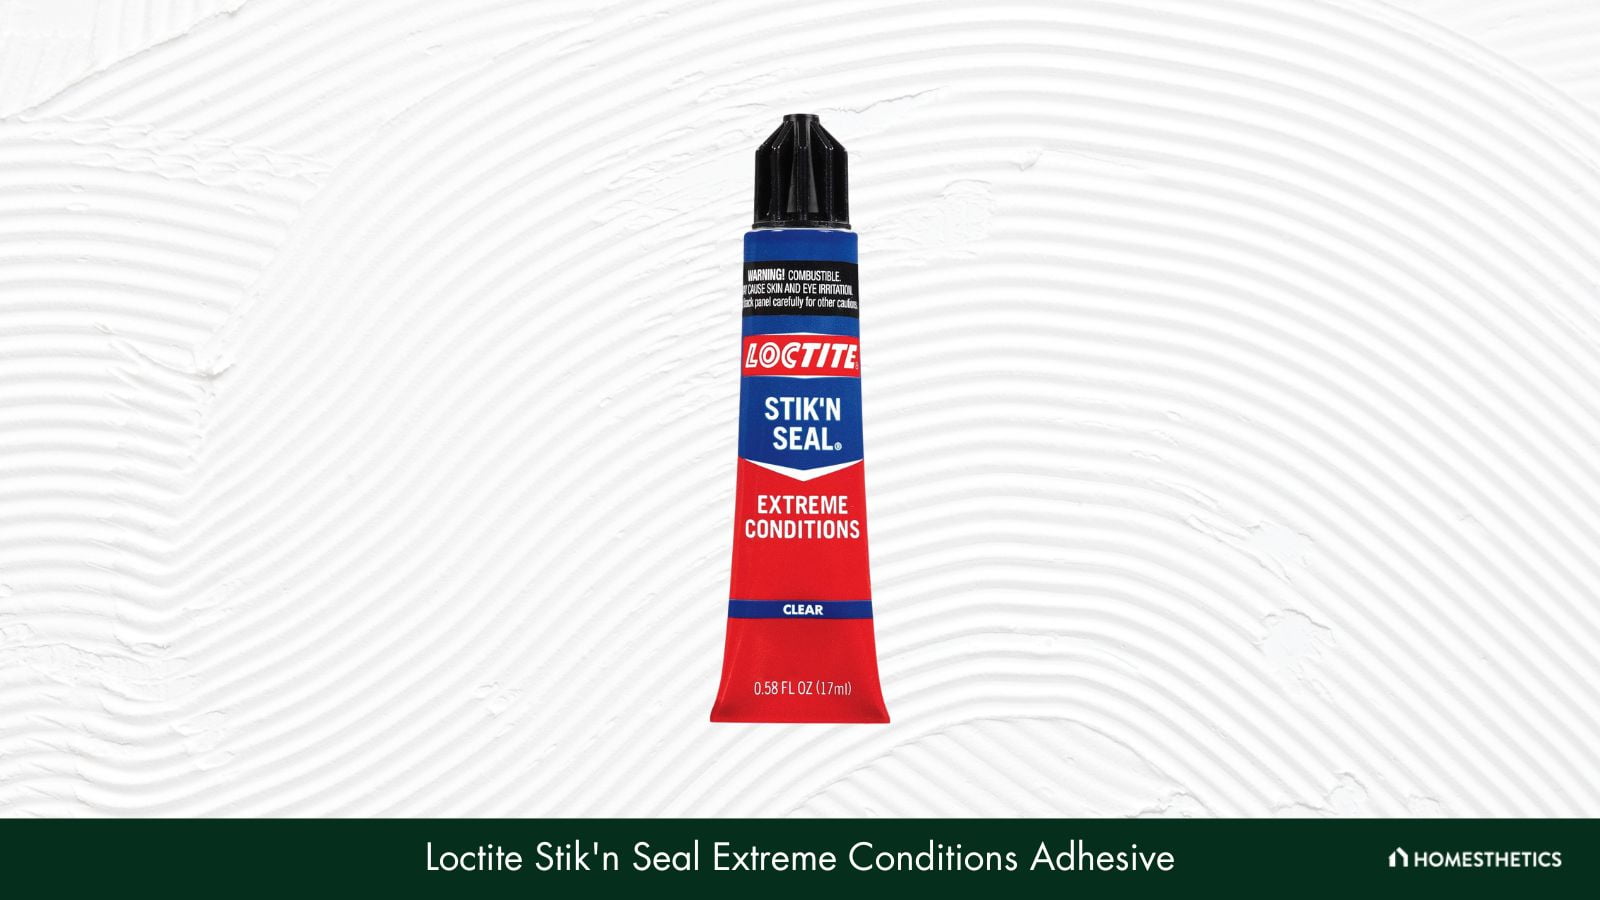 Loctite Stikn Seal Extreme Conditions Adhesive